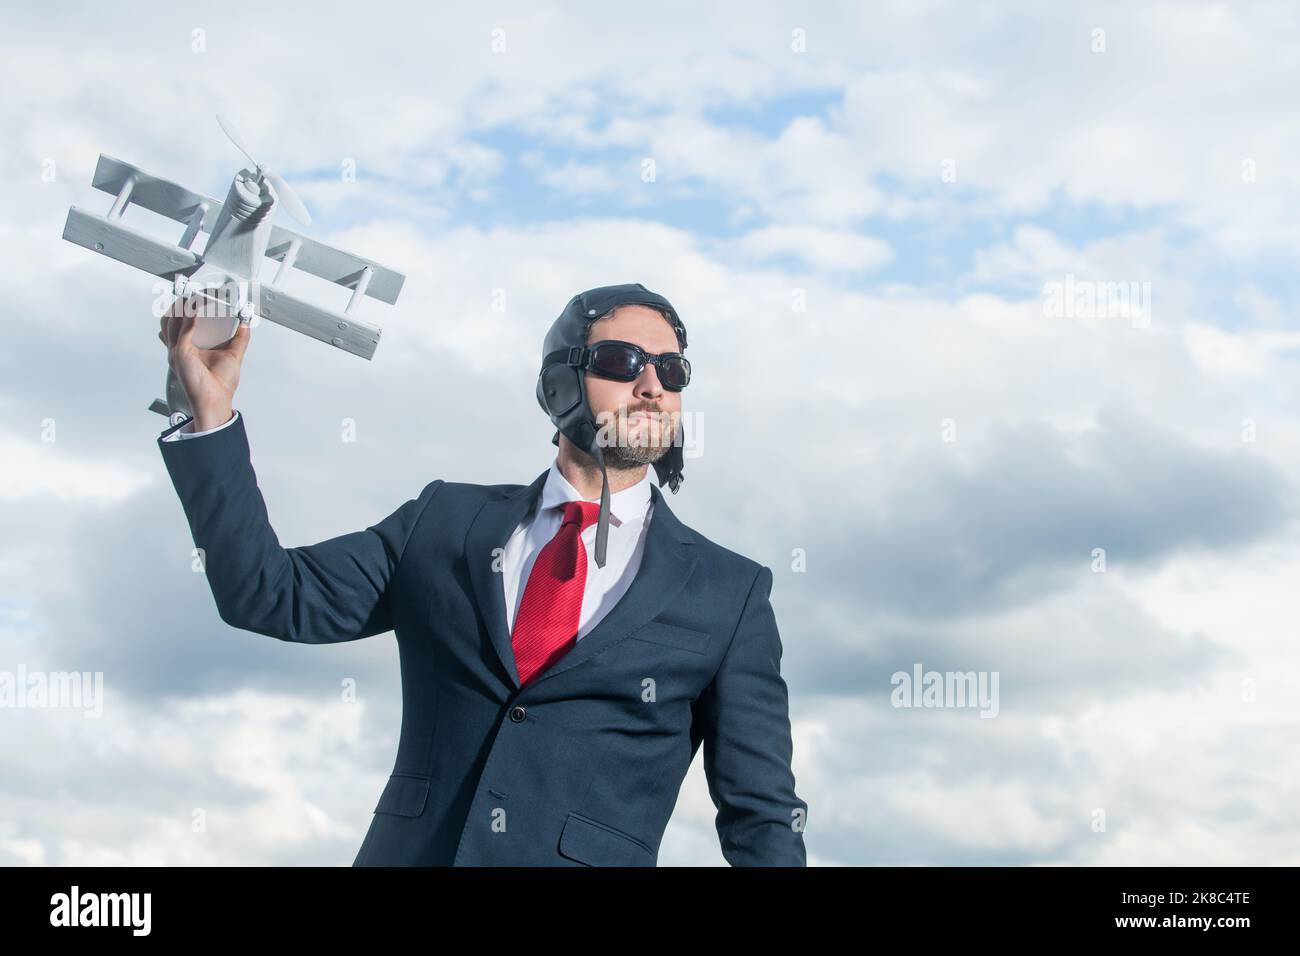 businessman in suit and pilot hat launch plane toy. think big Stock Photo